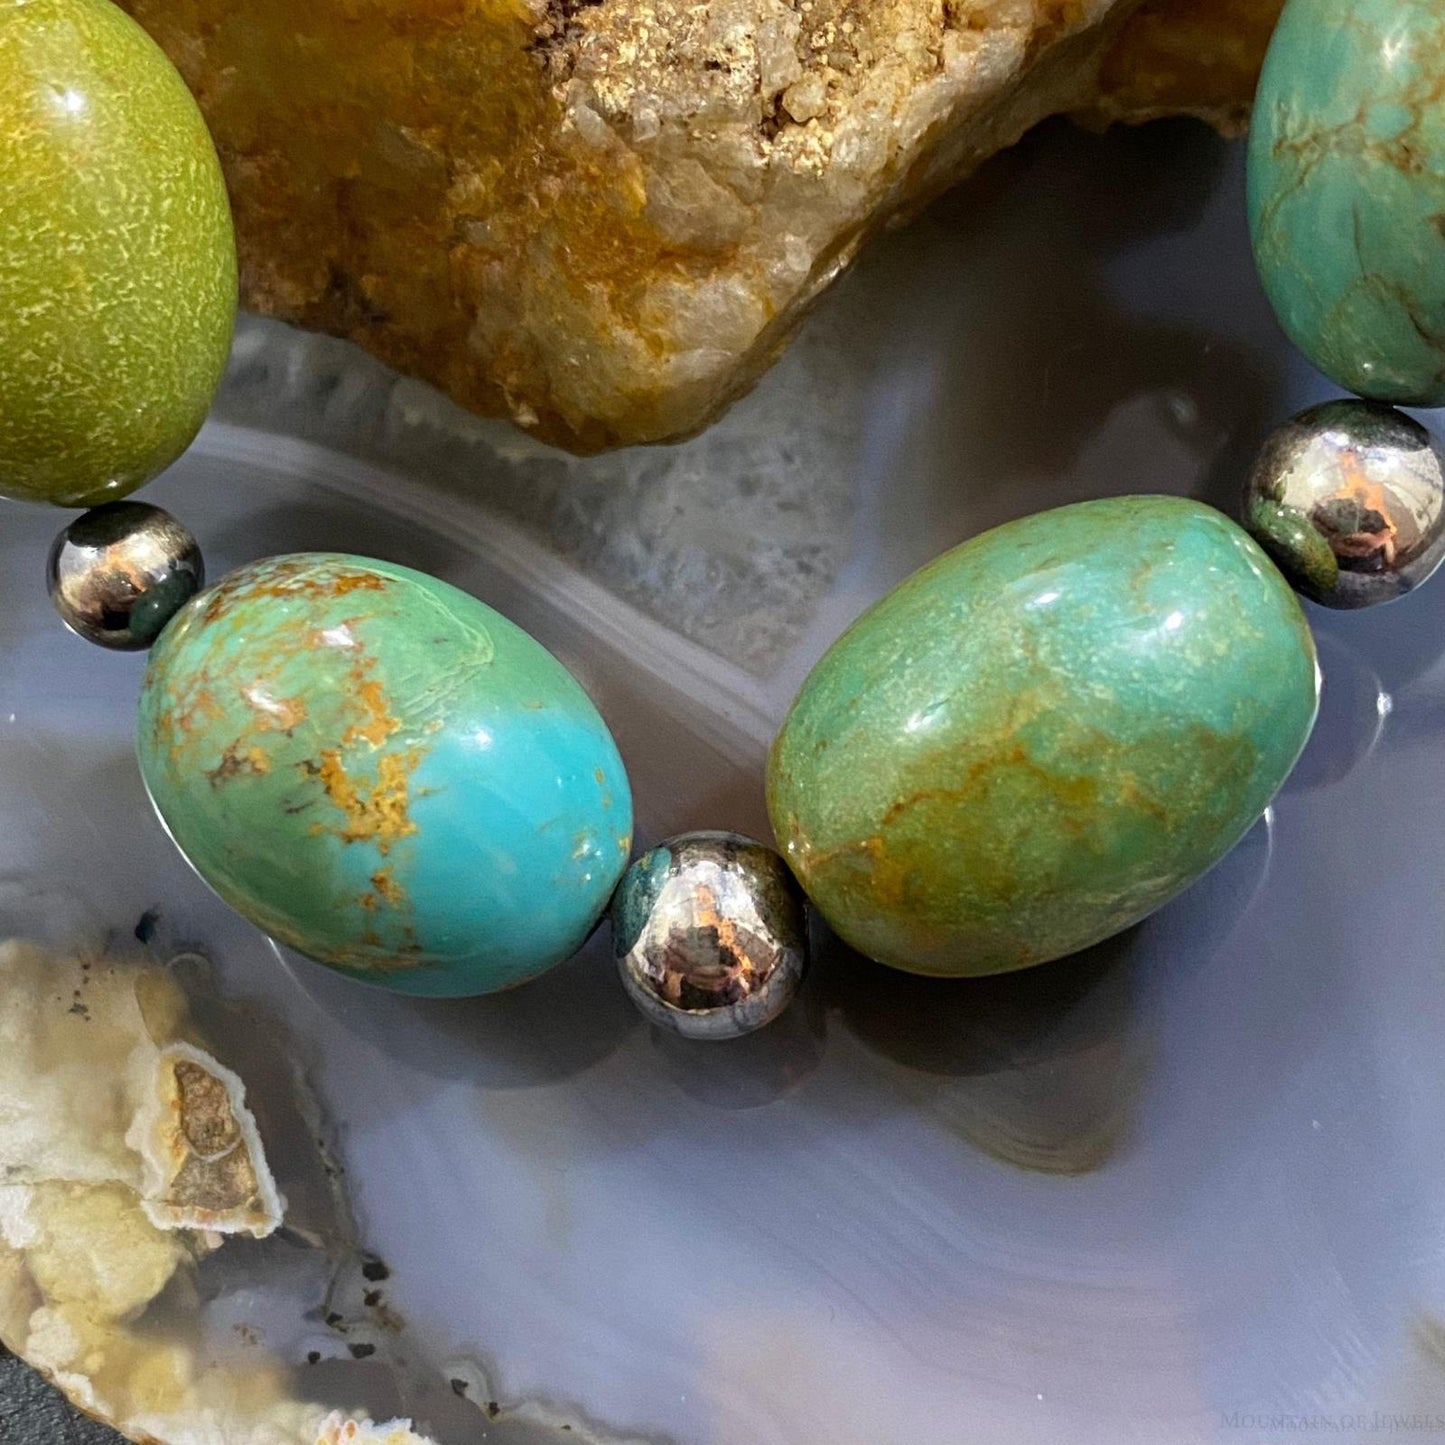 Carolyn Pollack Sterling Silver Egg Shape Green Turquoise Necklace For Women